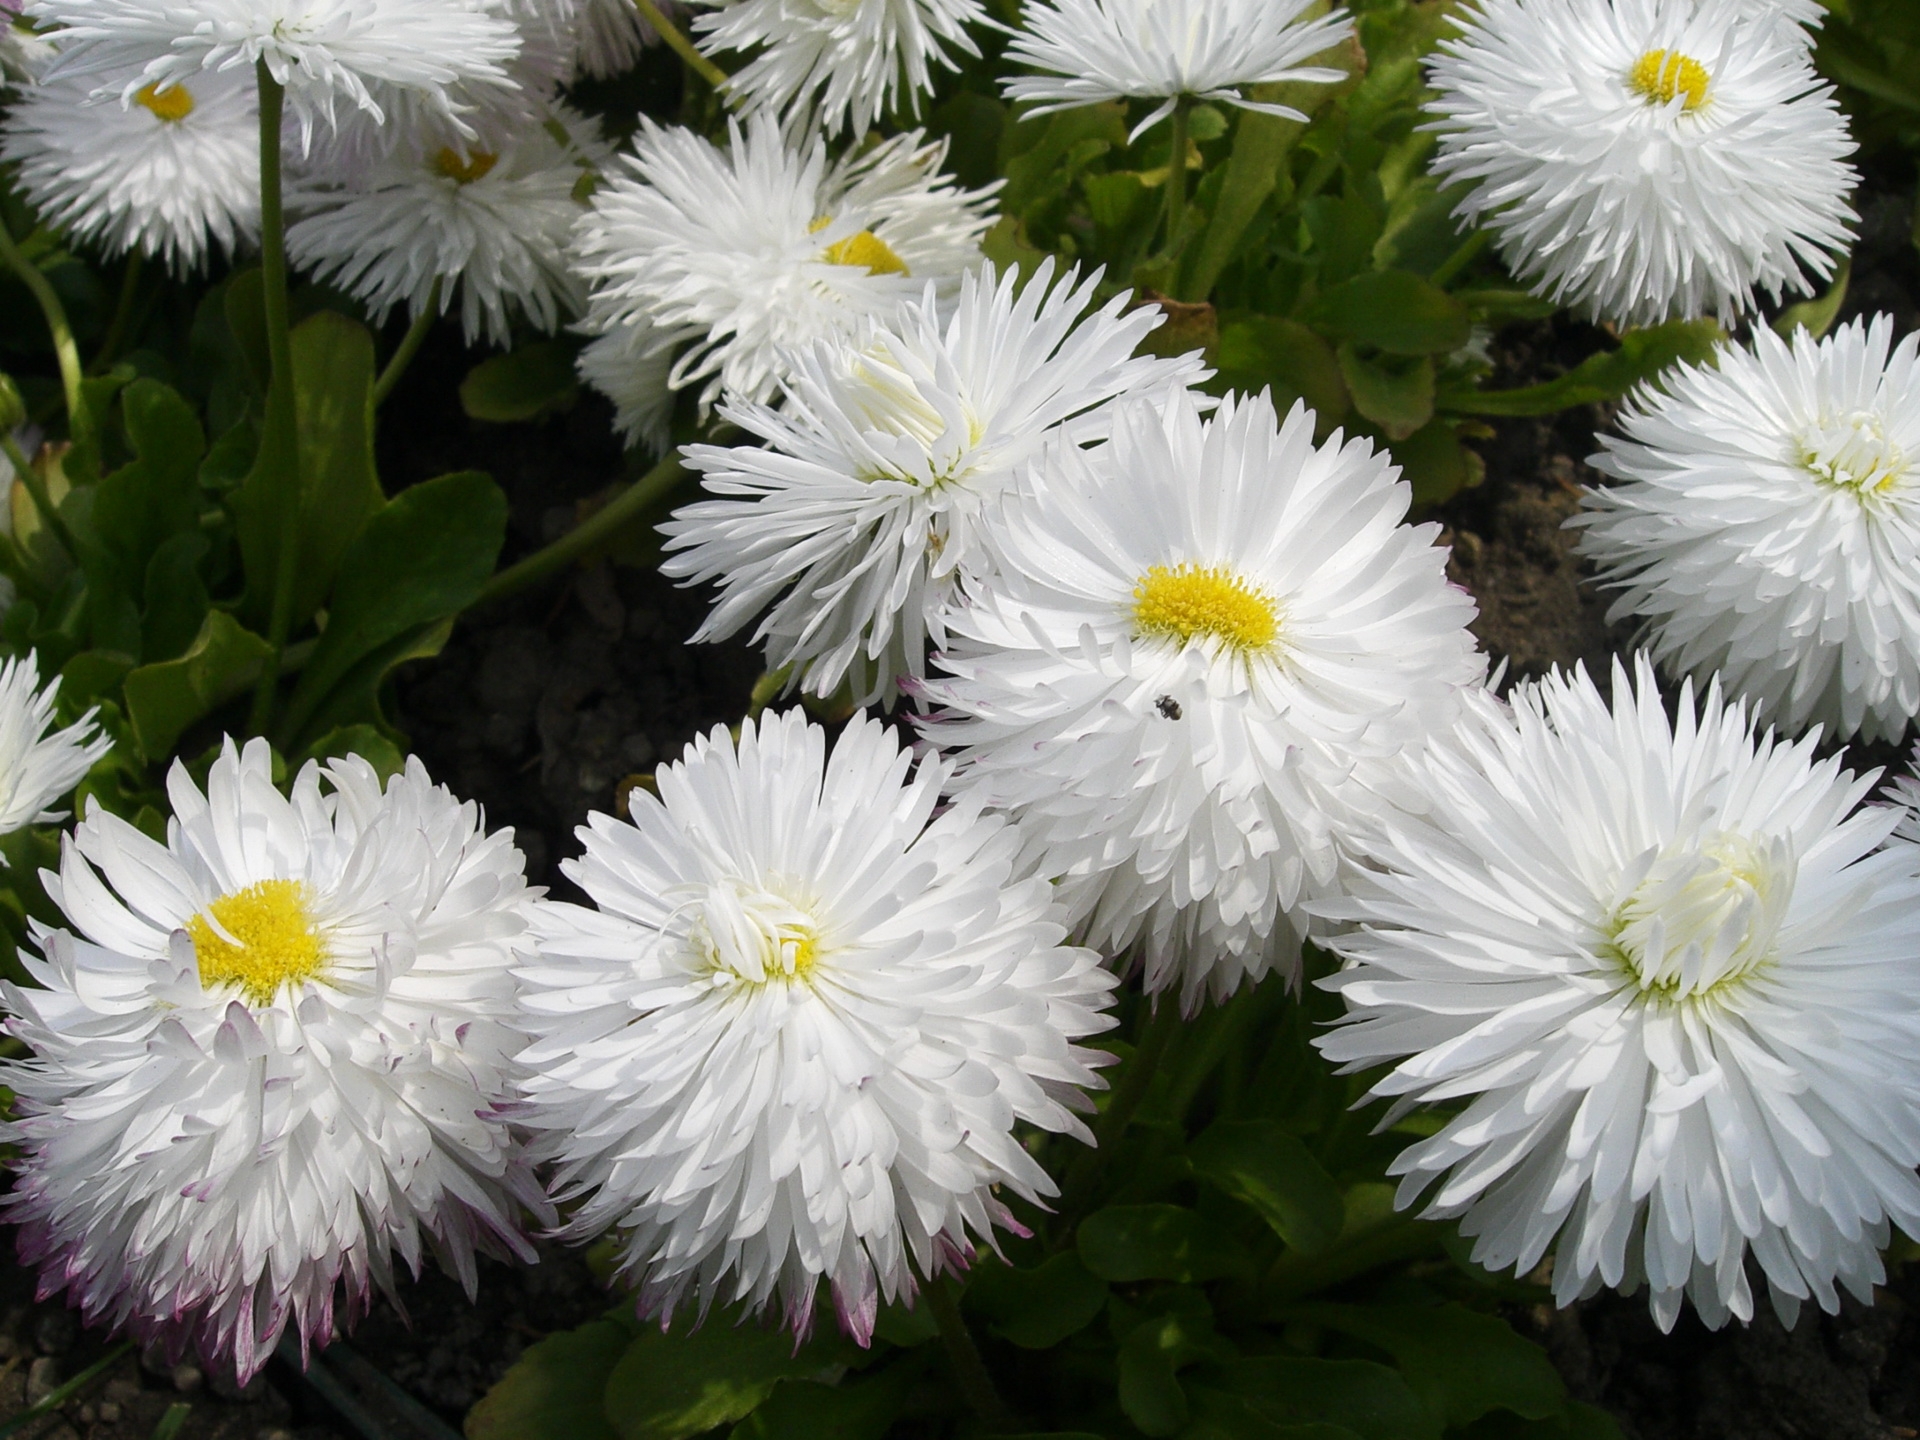 greens, flowers, white, close up, snow white, daisies